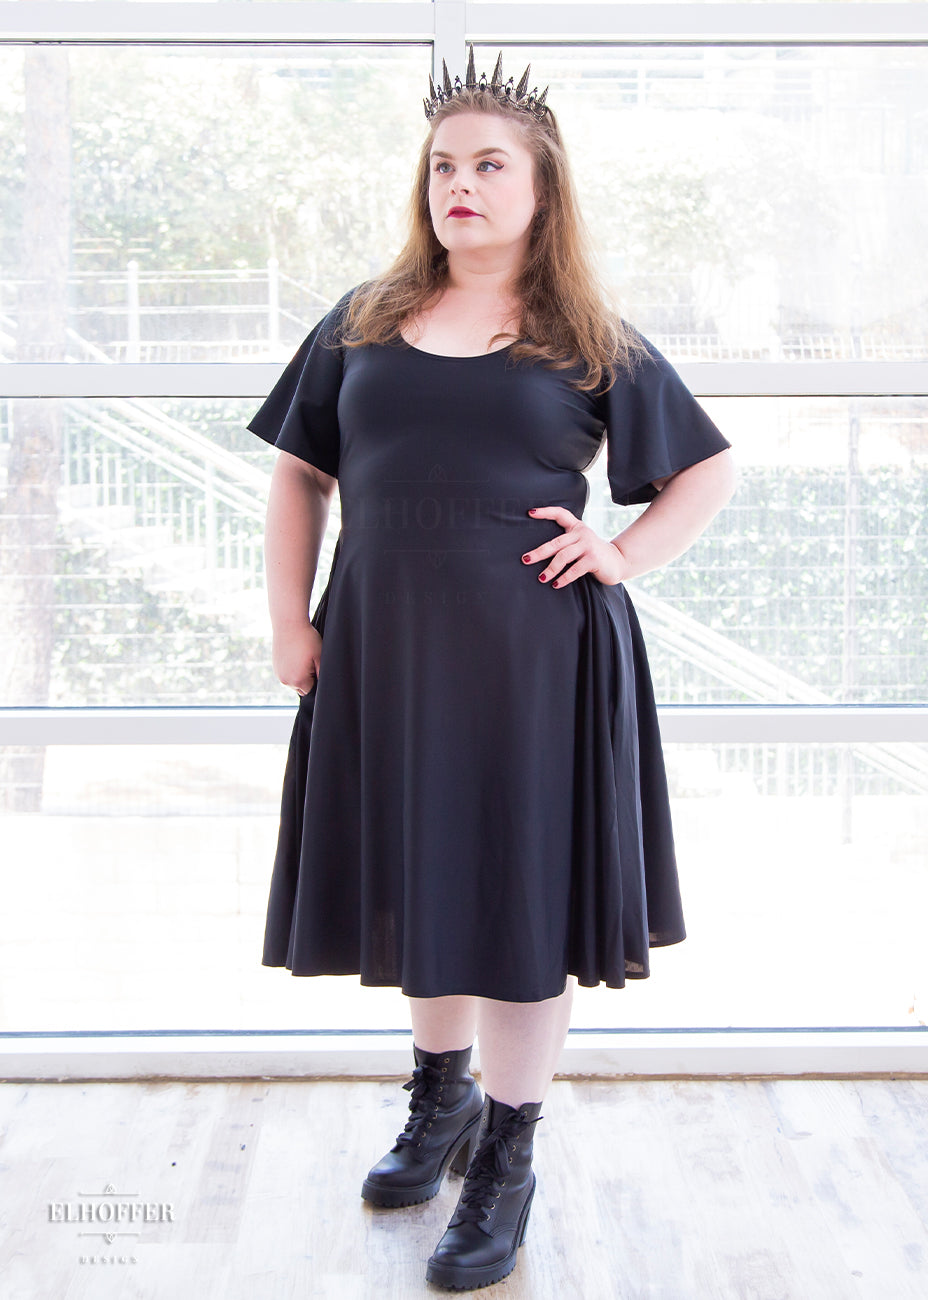 Lucy, a size large fair skinned model with long dark brown hair, is wearing a knee-length pullover dress with scoop neck, flutter sleeves, and side pockets in black.